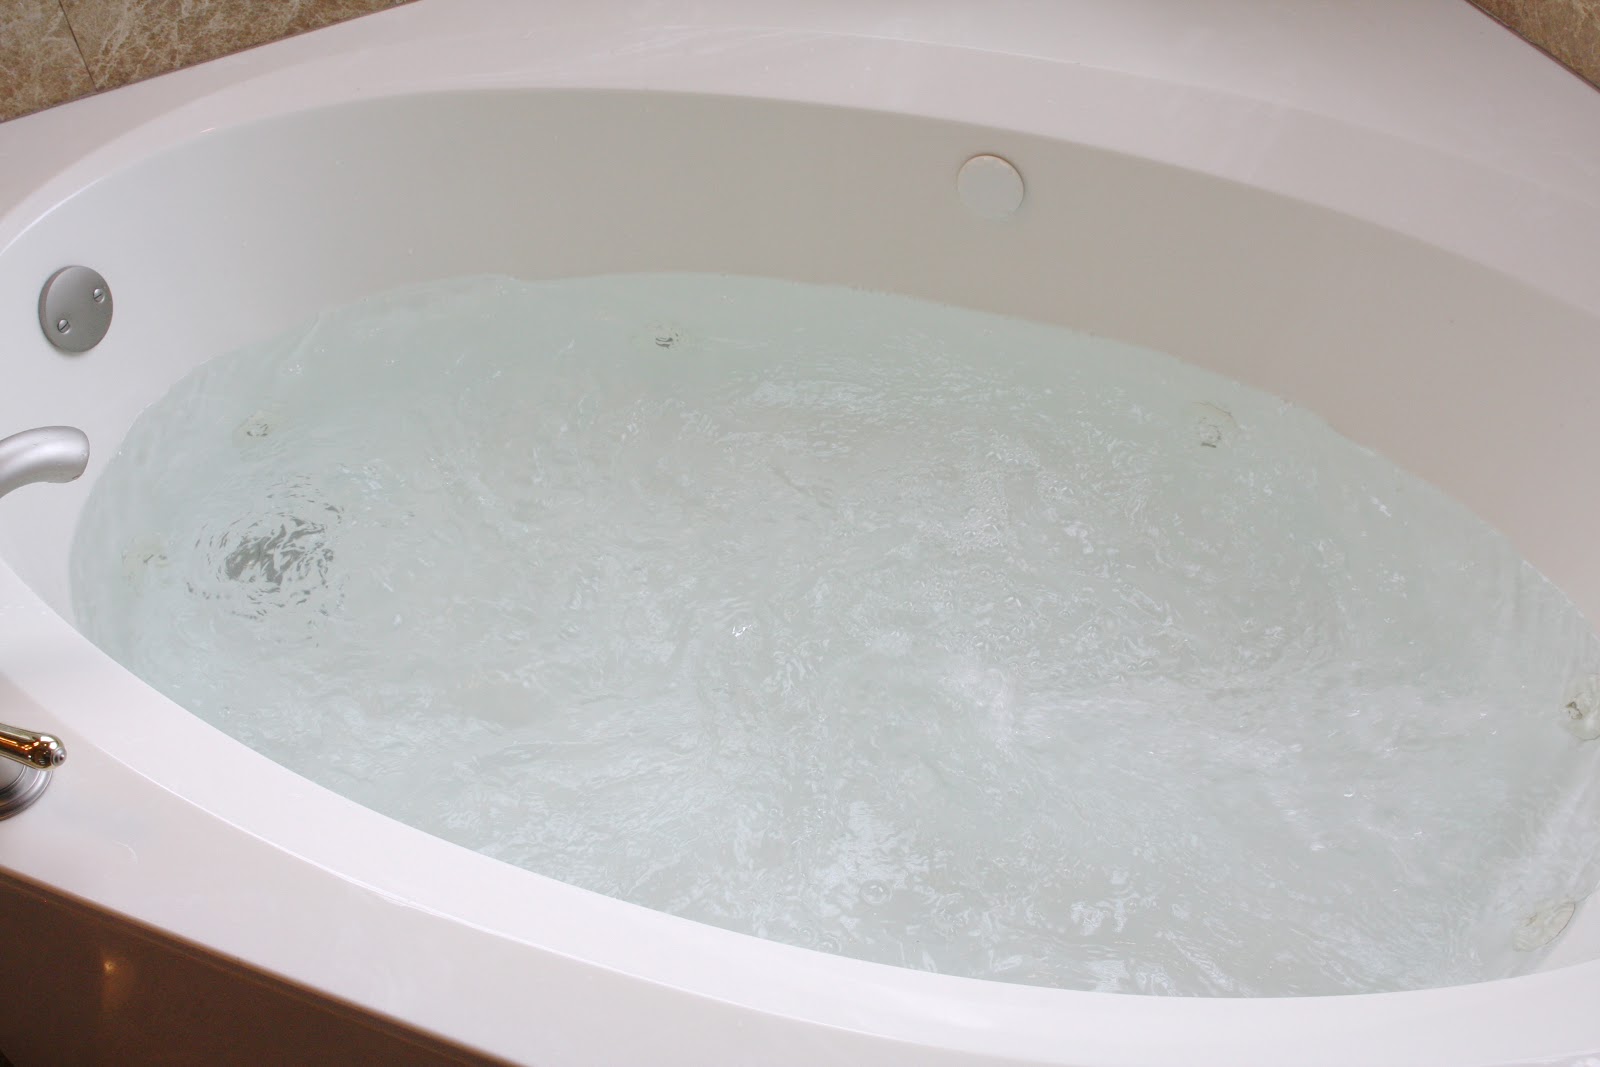 How To Clean Whirlpool Tub Jets Simply Organized